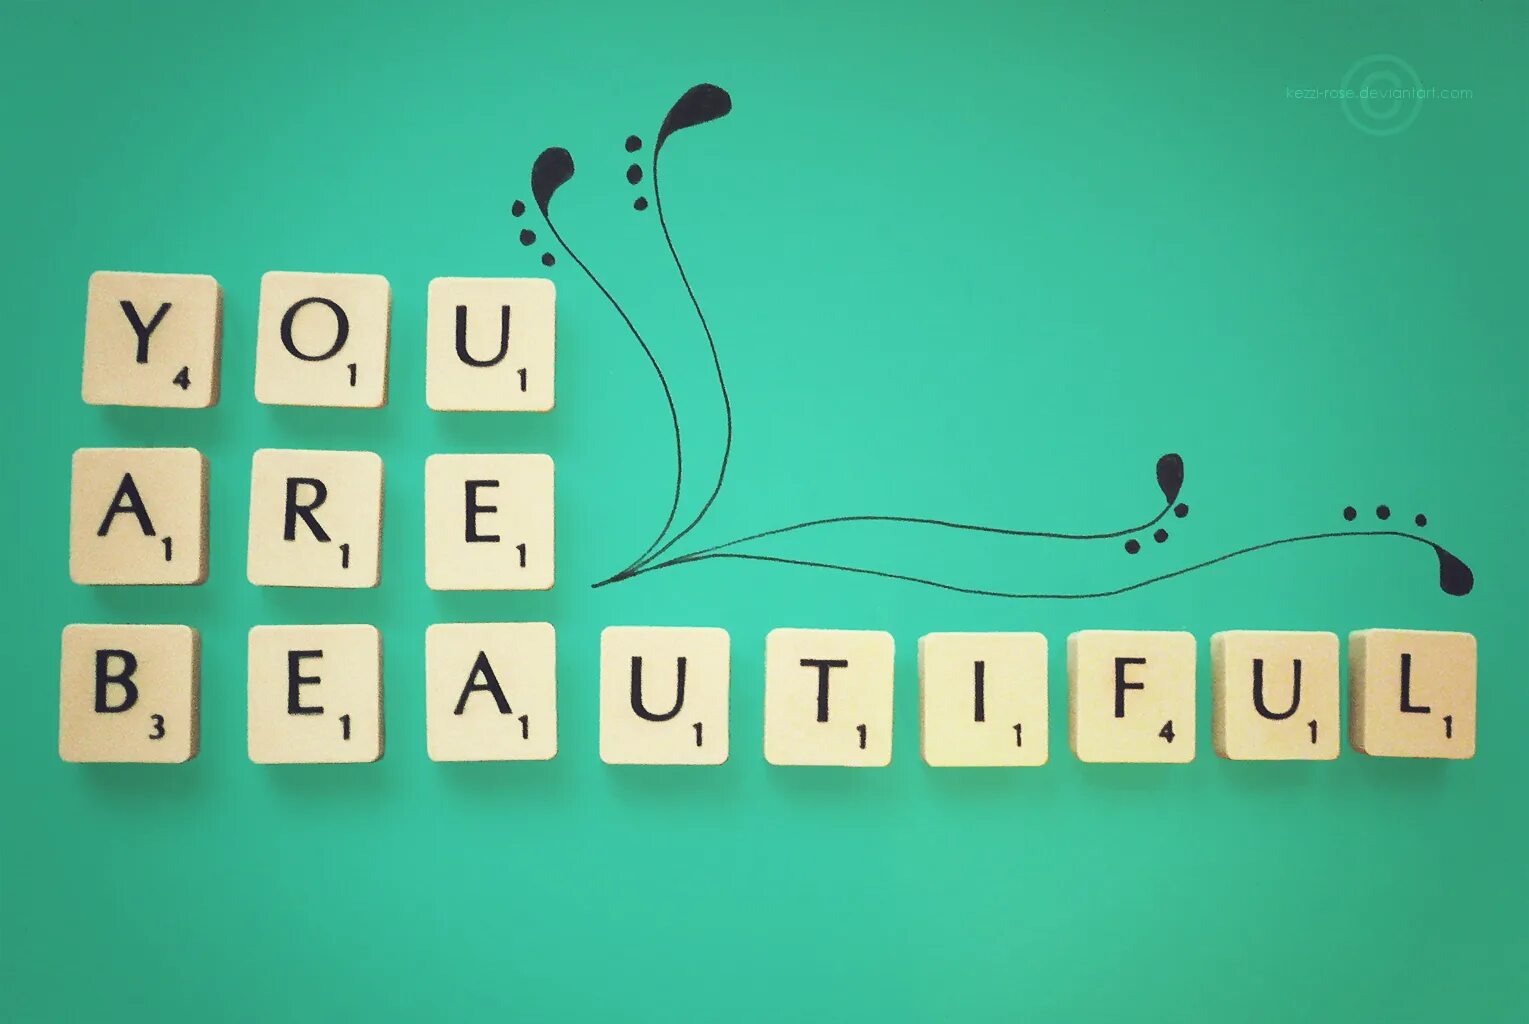 You are. You are picture. You are beautiful. You are q. Are you hearing anything